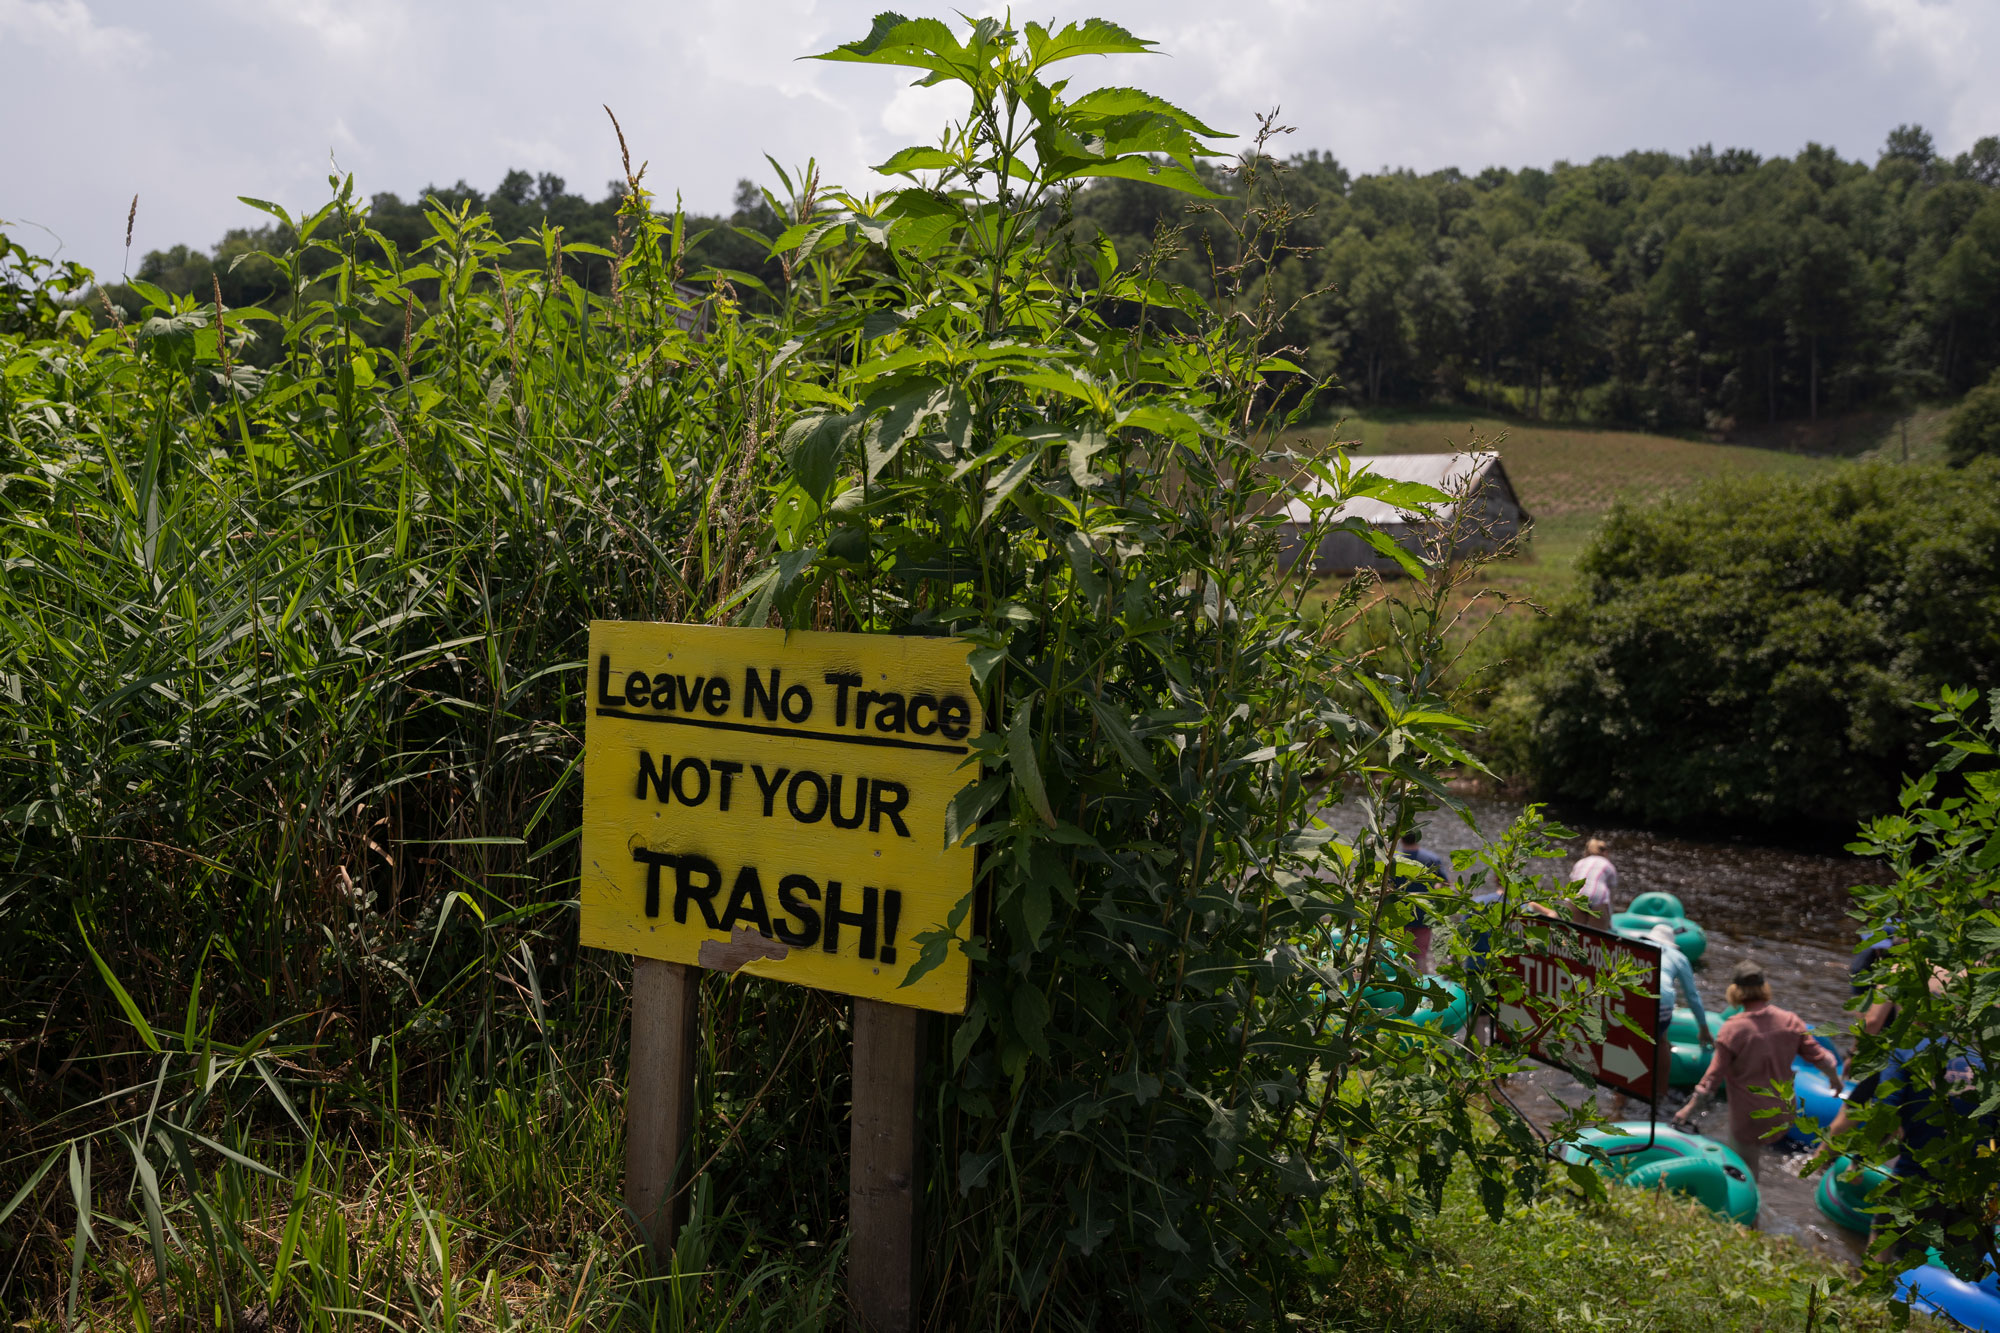 A sign saying "Leave no trace, not your trash!" sits in front of a river where people are tubing